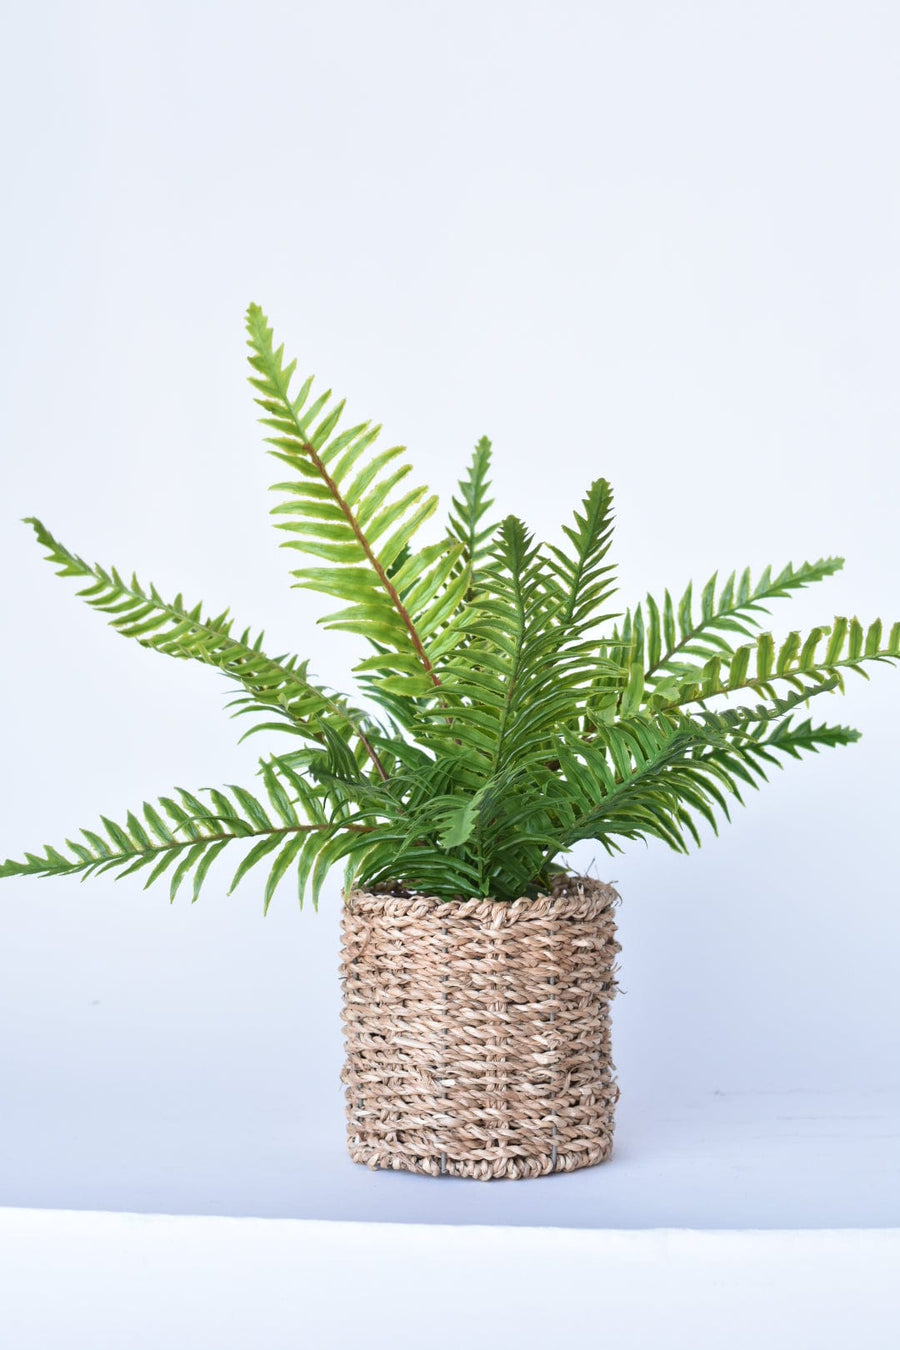 15" Faux Boston Fern in Seagrass Basket Container